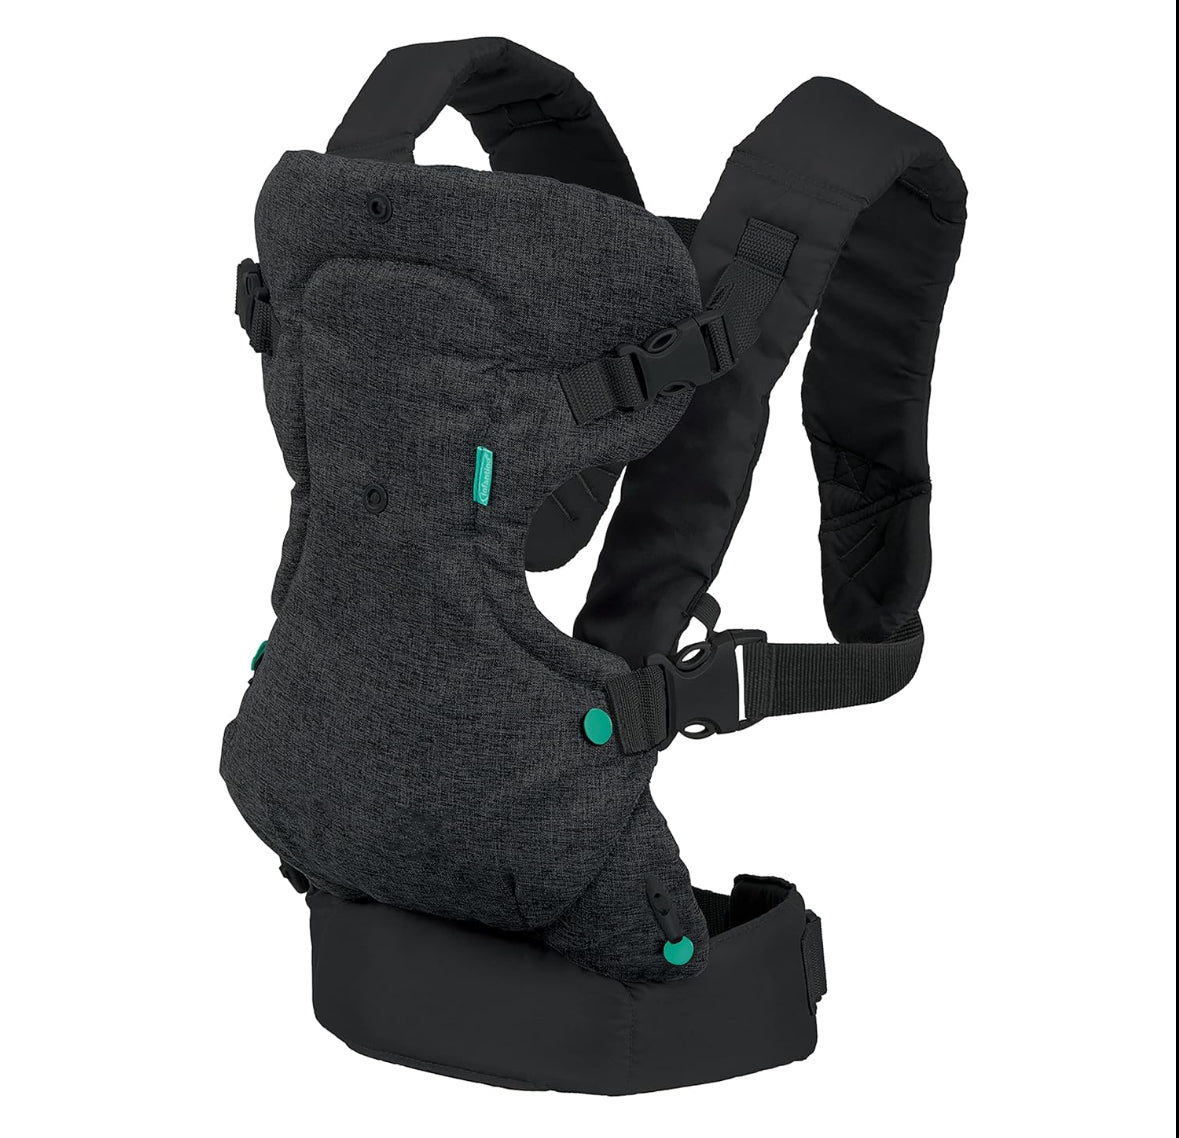 Infantino Baby Carrier Flip Advanced 4-in-1